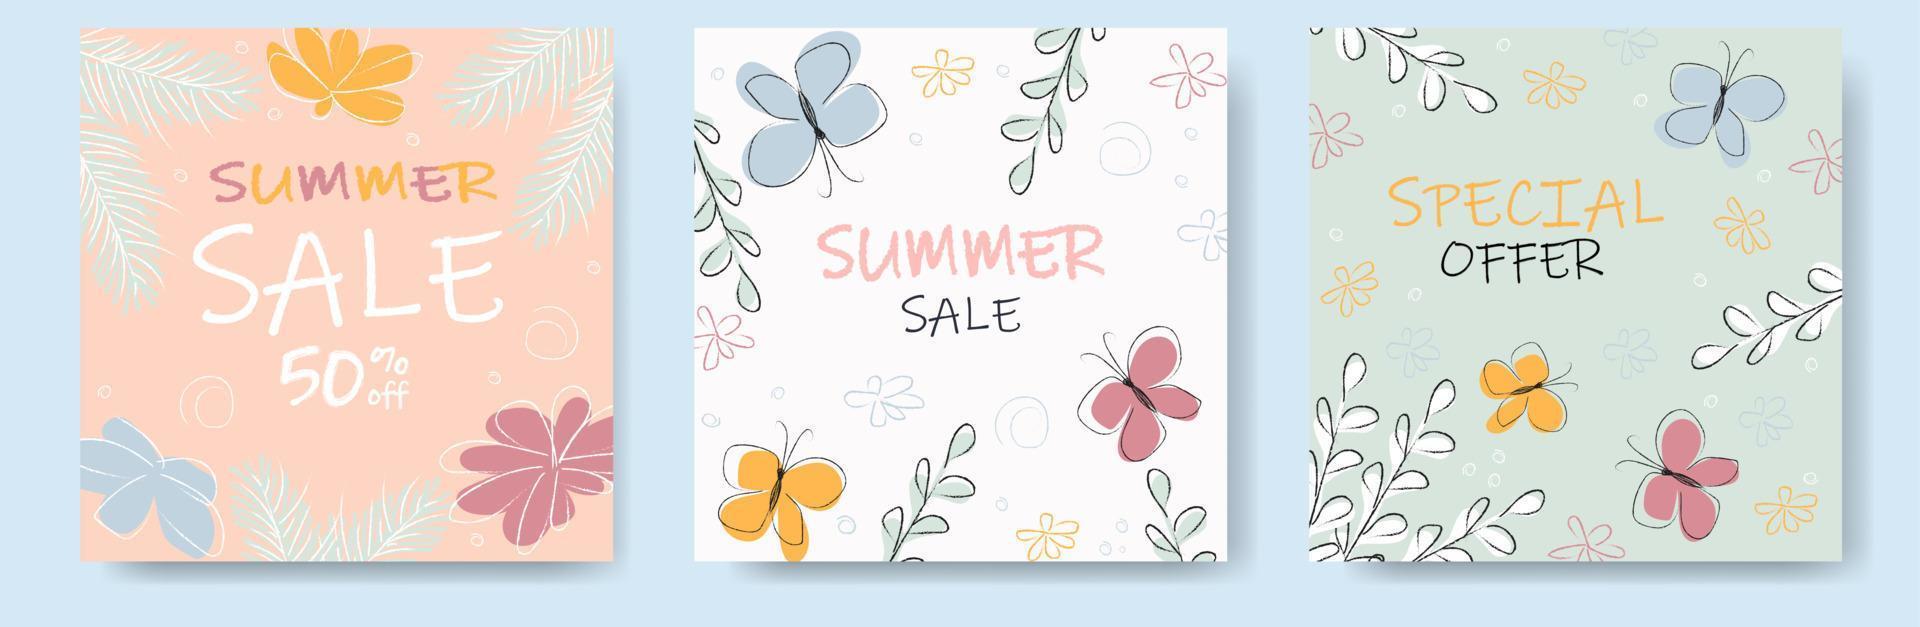 Summer sale banners vector